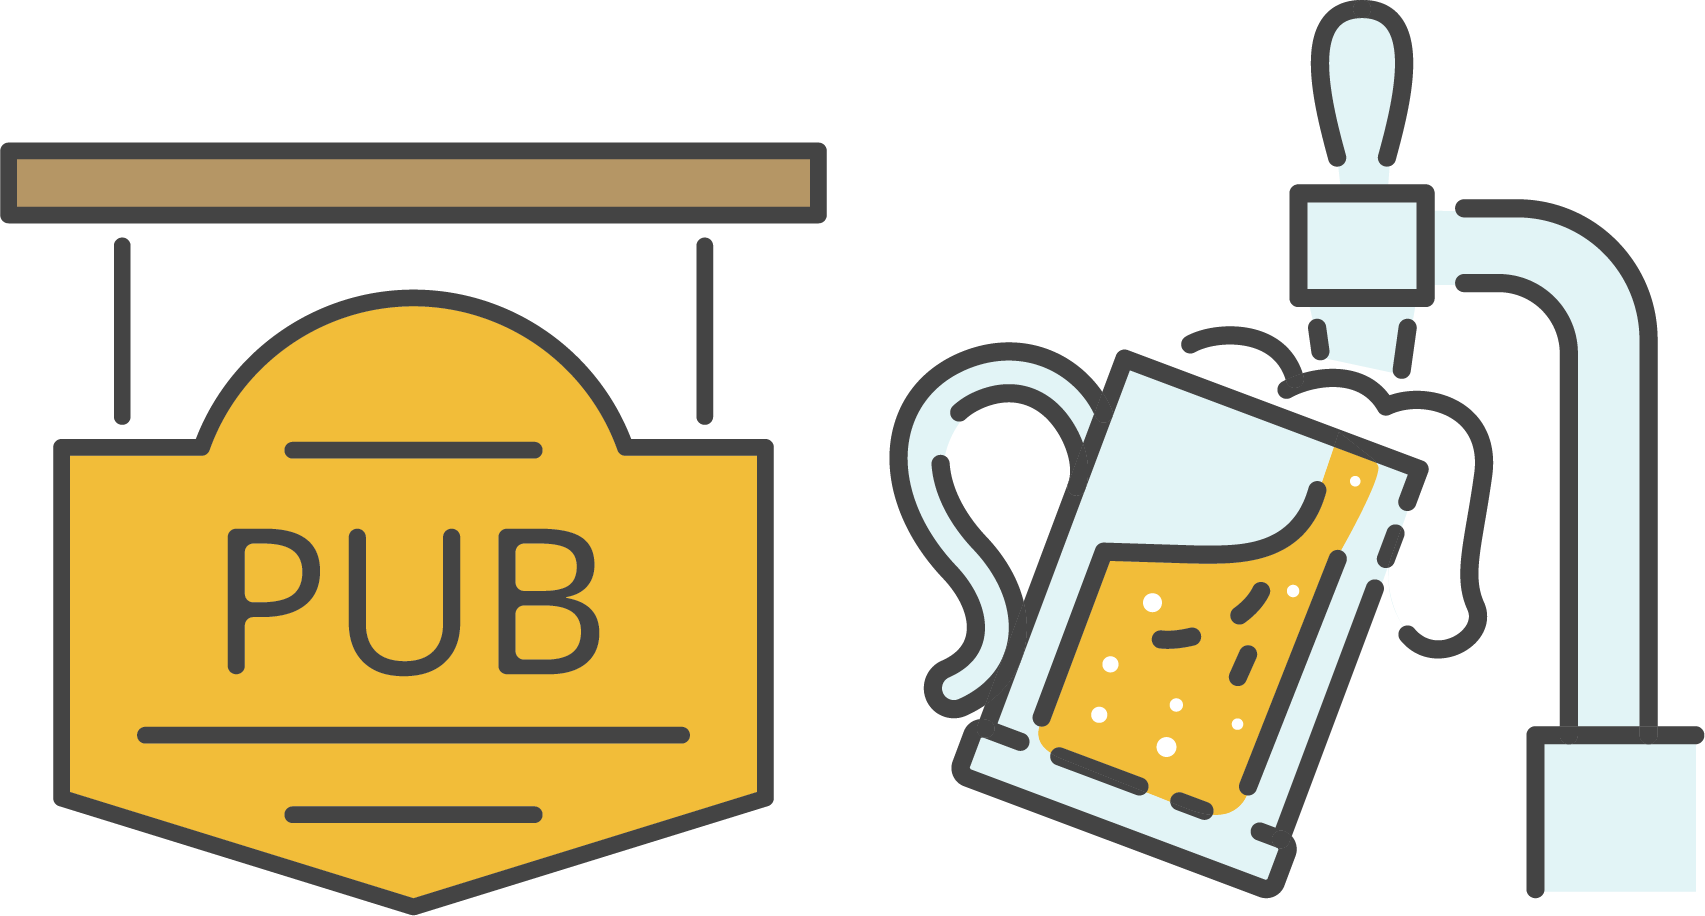 Pub and tap icons